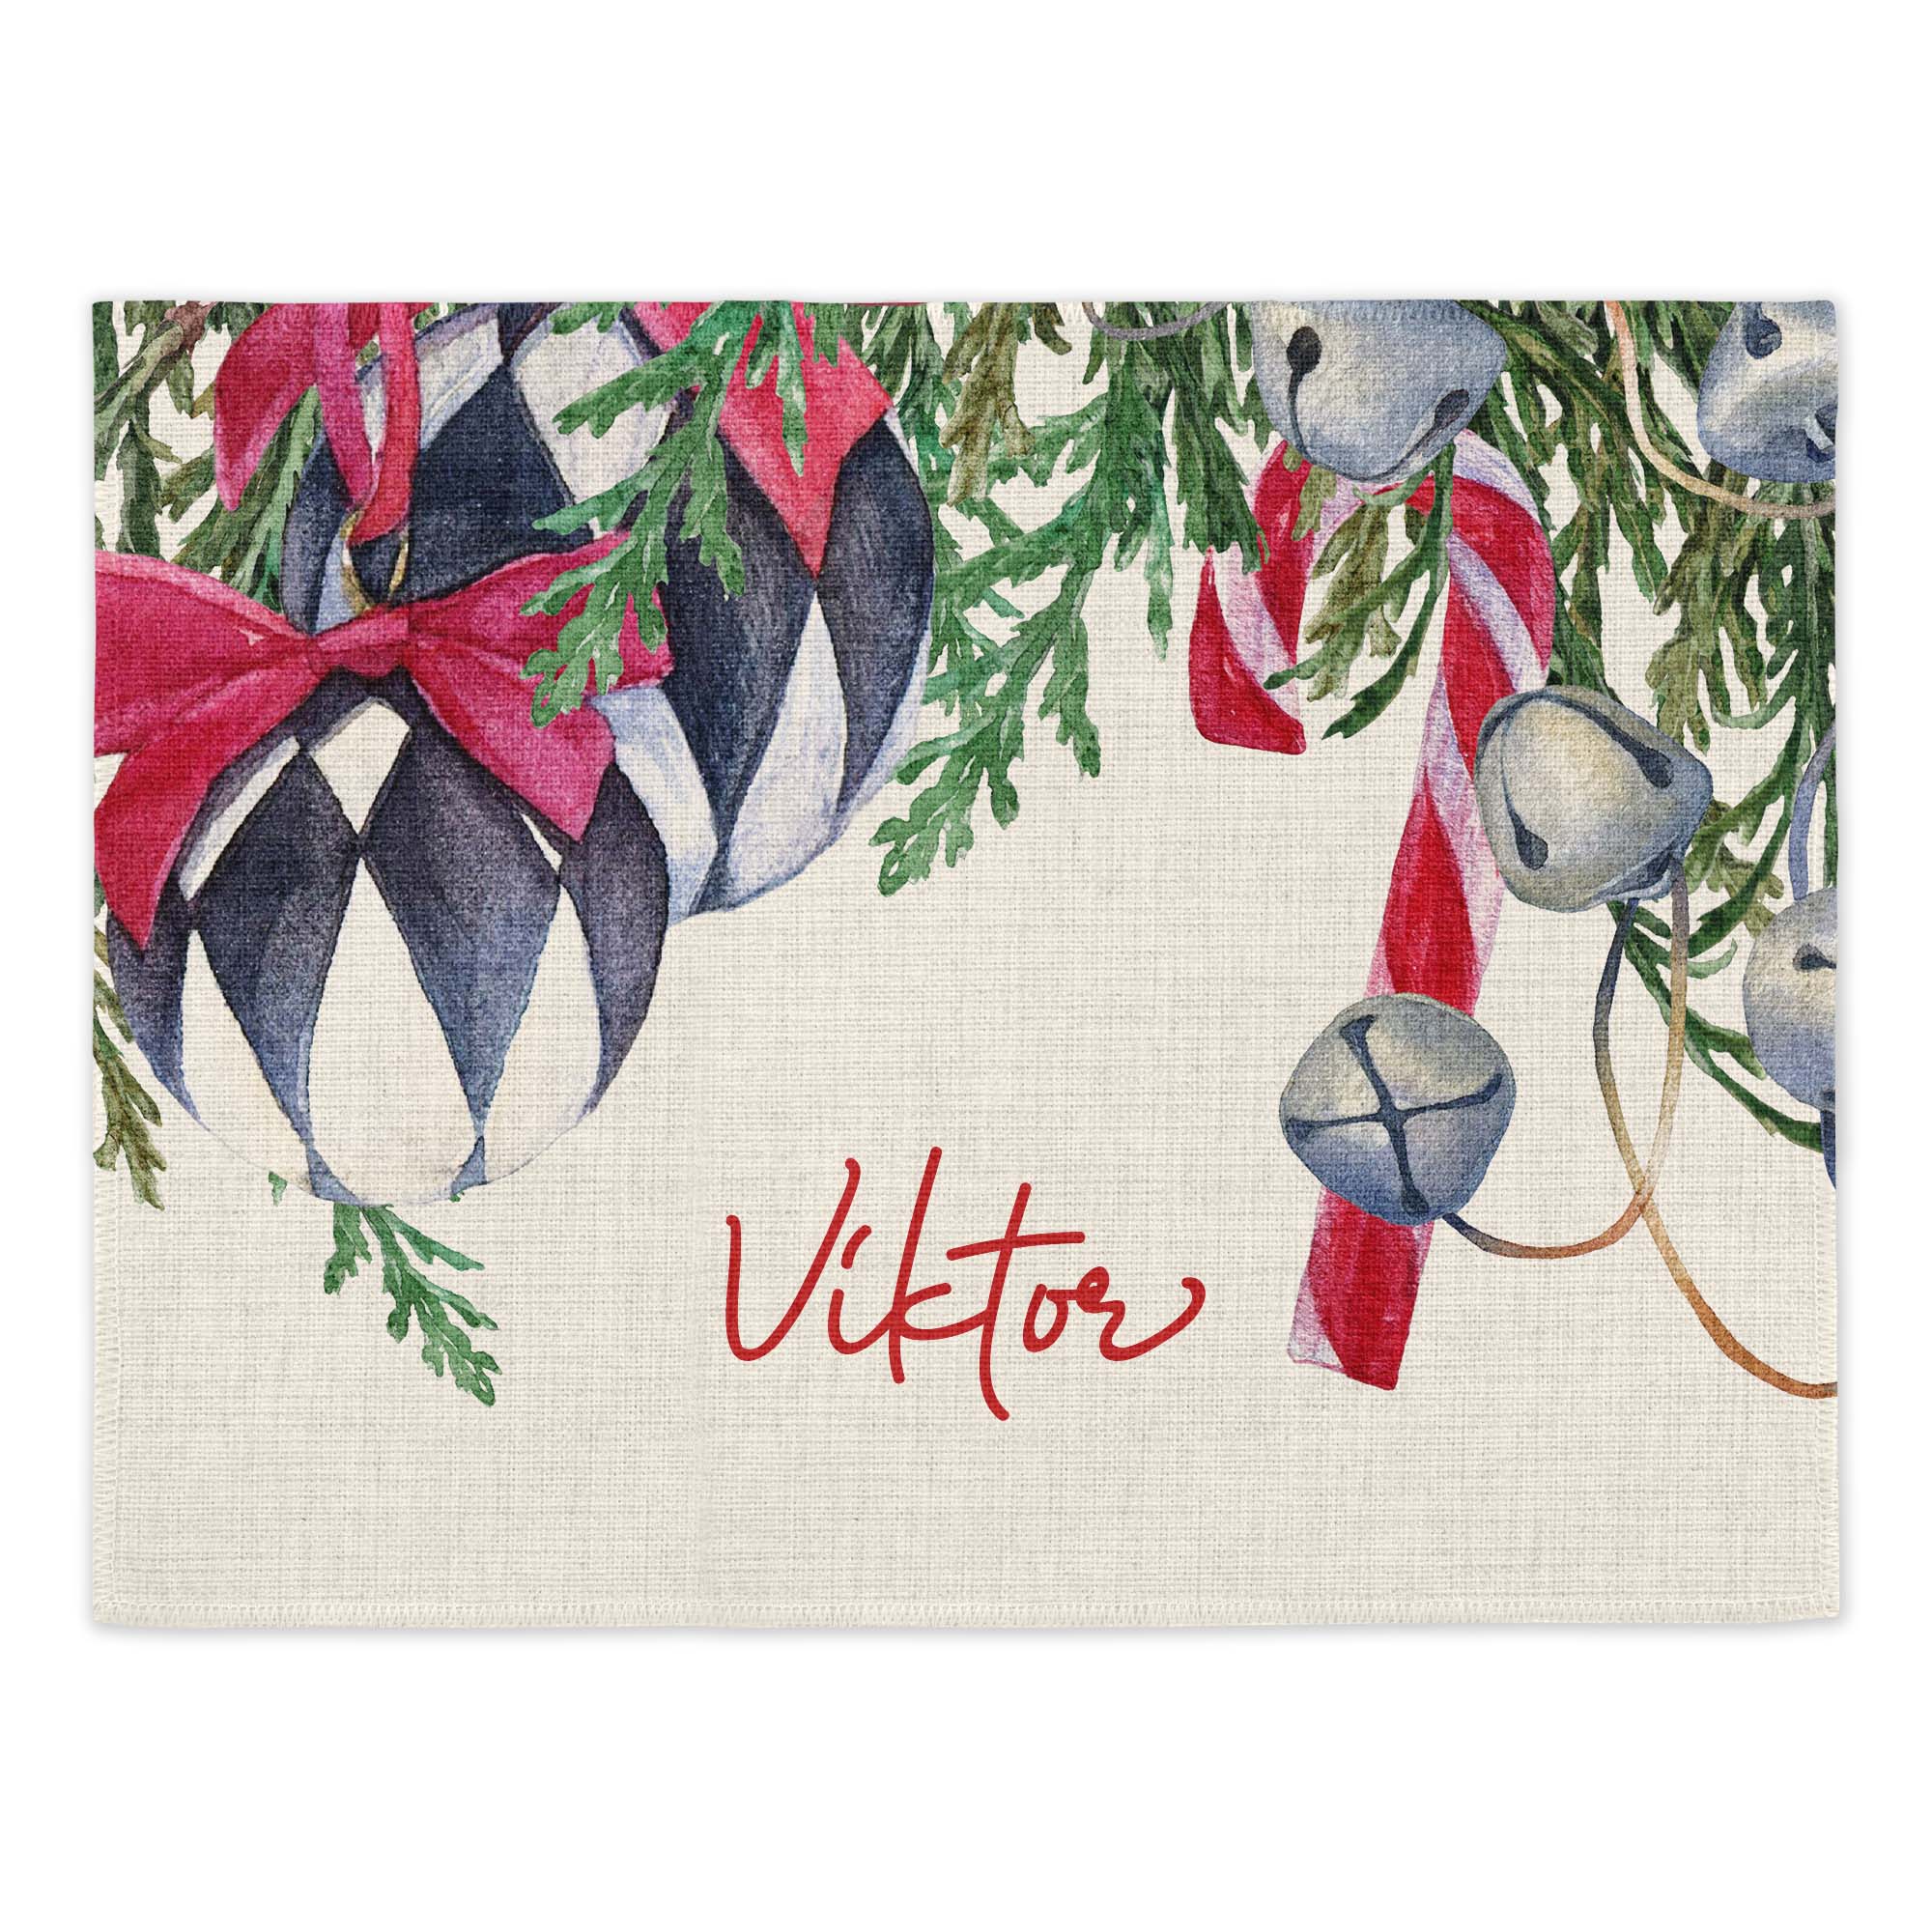 Linen effect polyester placemat with a Christmas tree design featuring silver bells on a string, a candle cane and black and white baubles with red ribbon. The placemat has an area for you to customise with a name or message.